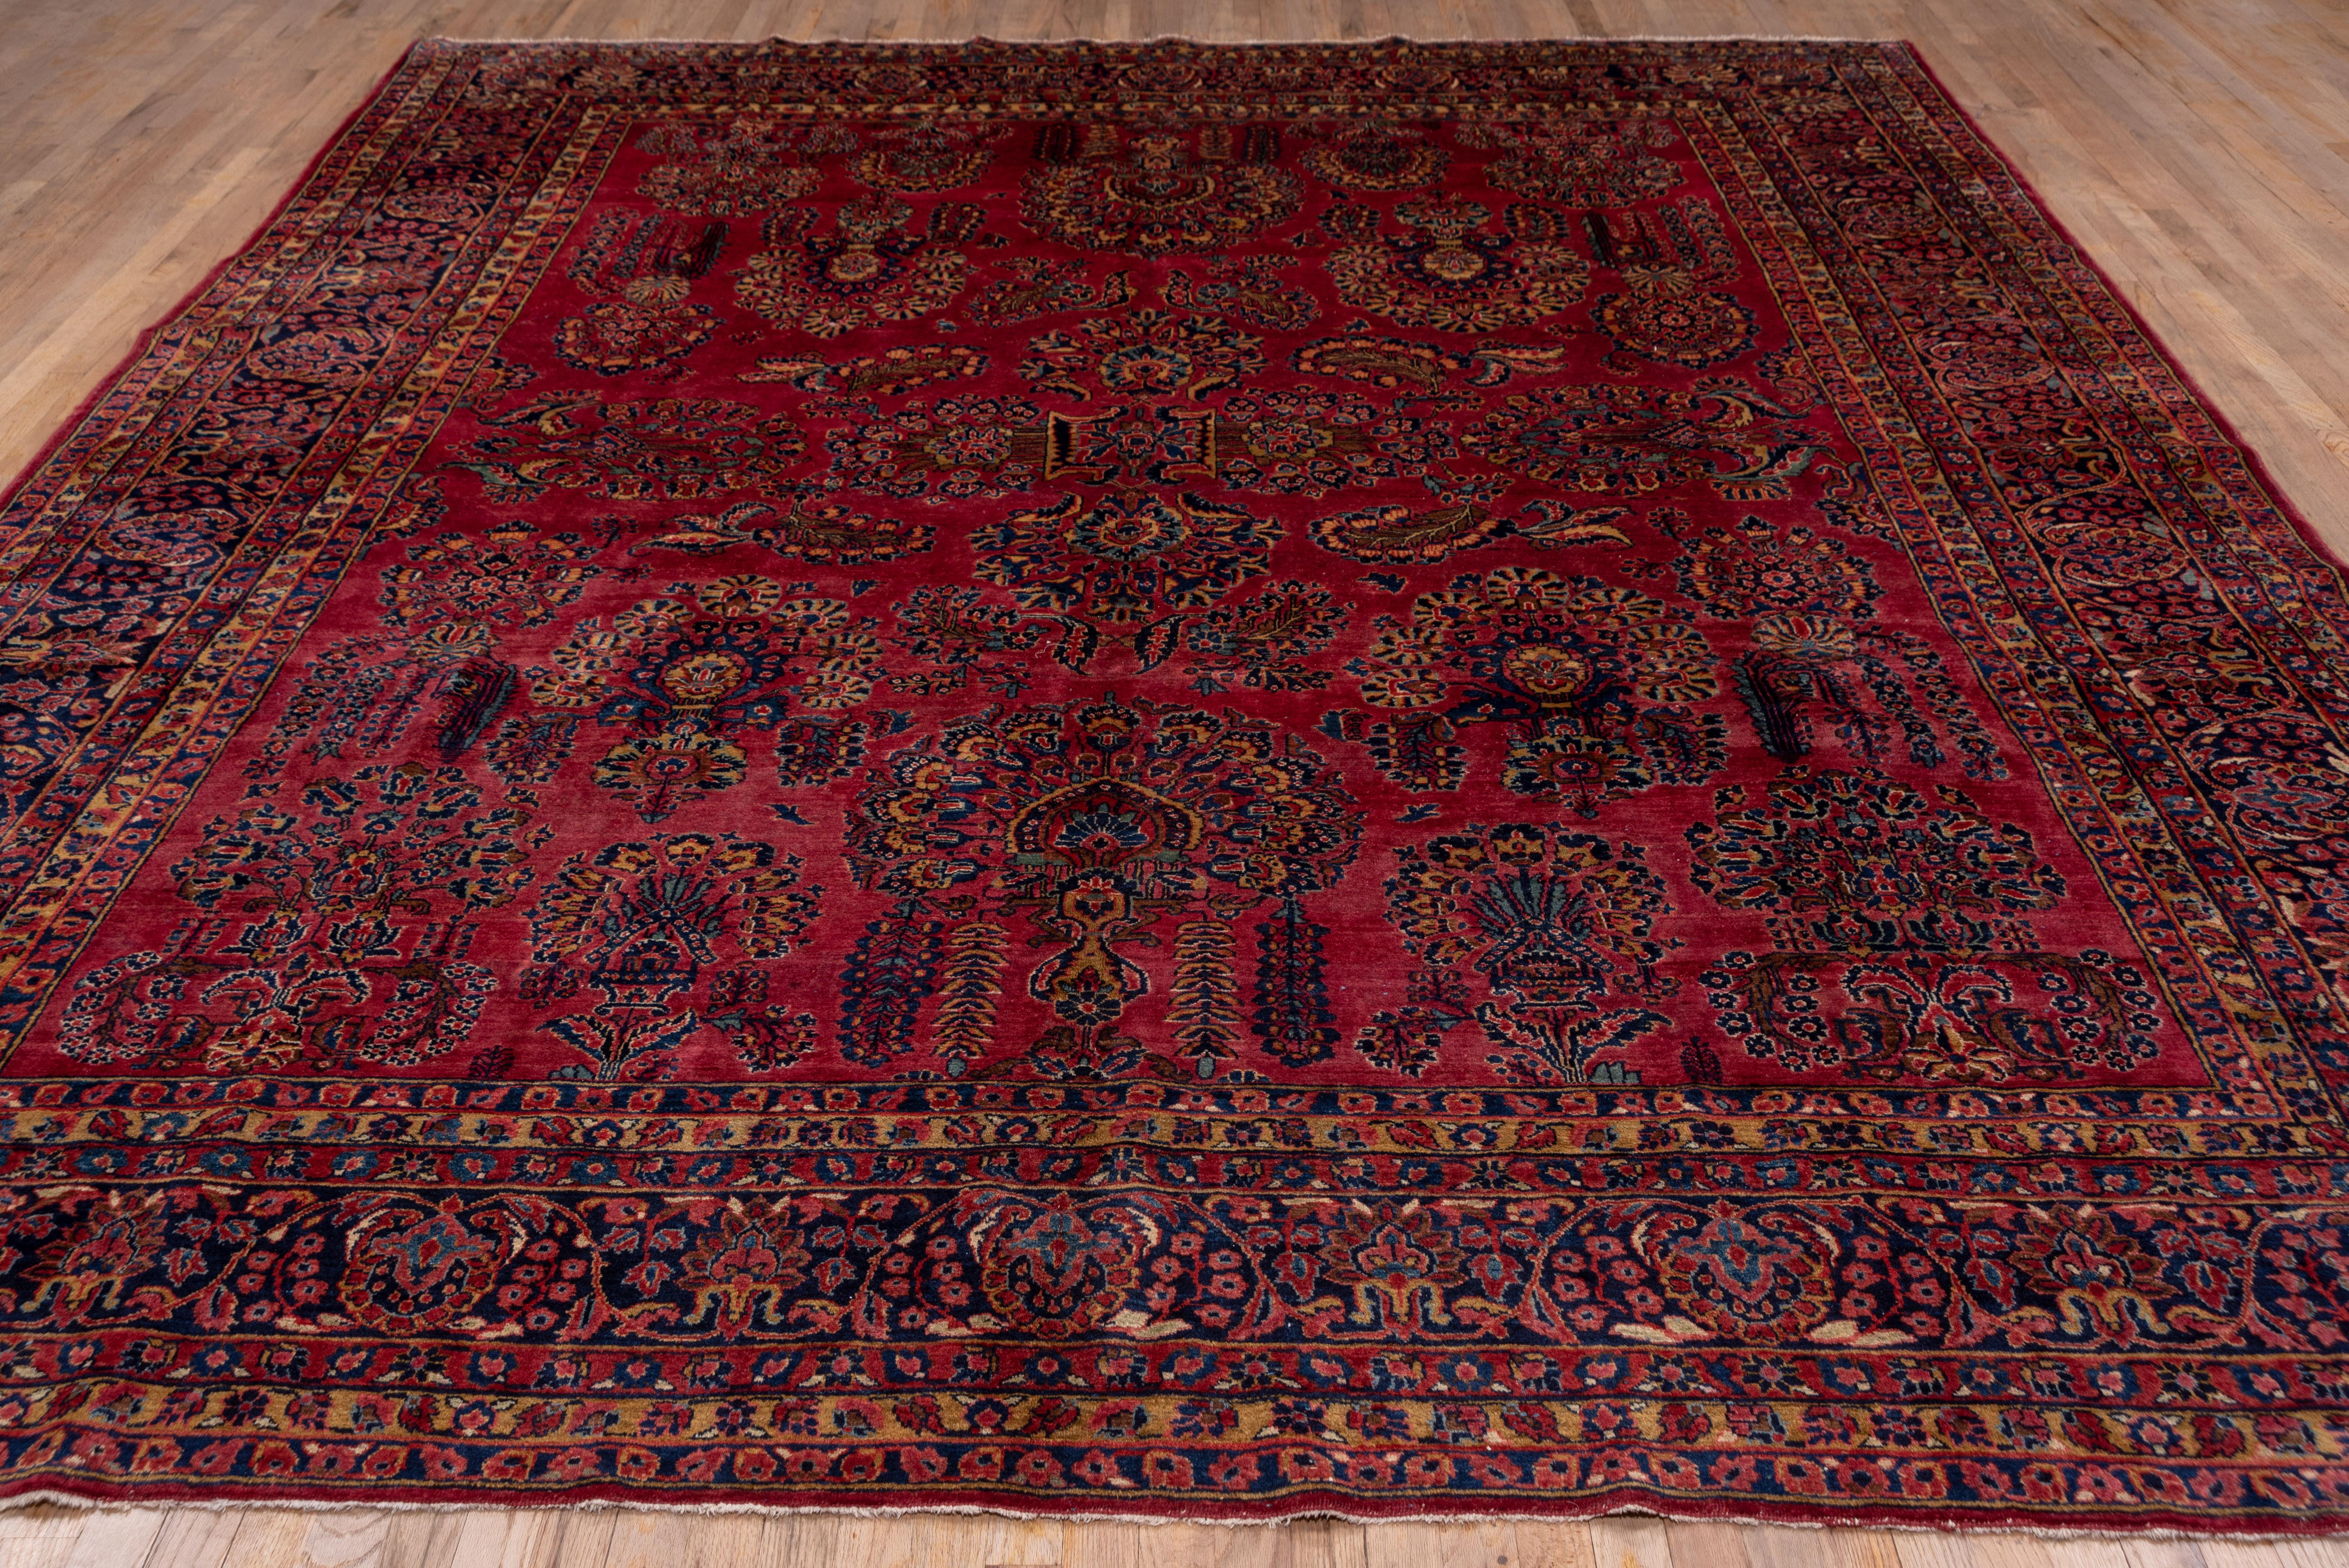 Wool Antique Persian Sarouk Rug, Bright Red Field, Gold and Blue Accents, Medium Pile For Sale